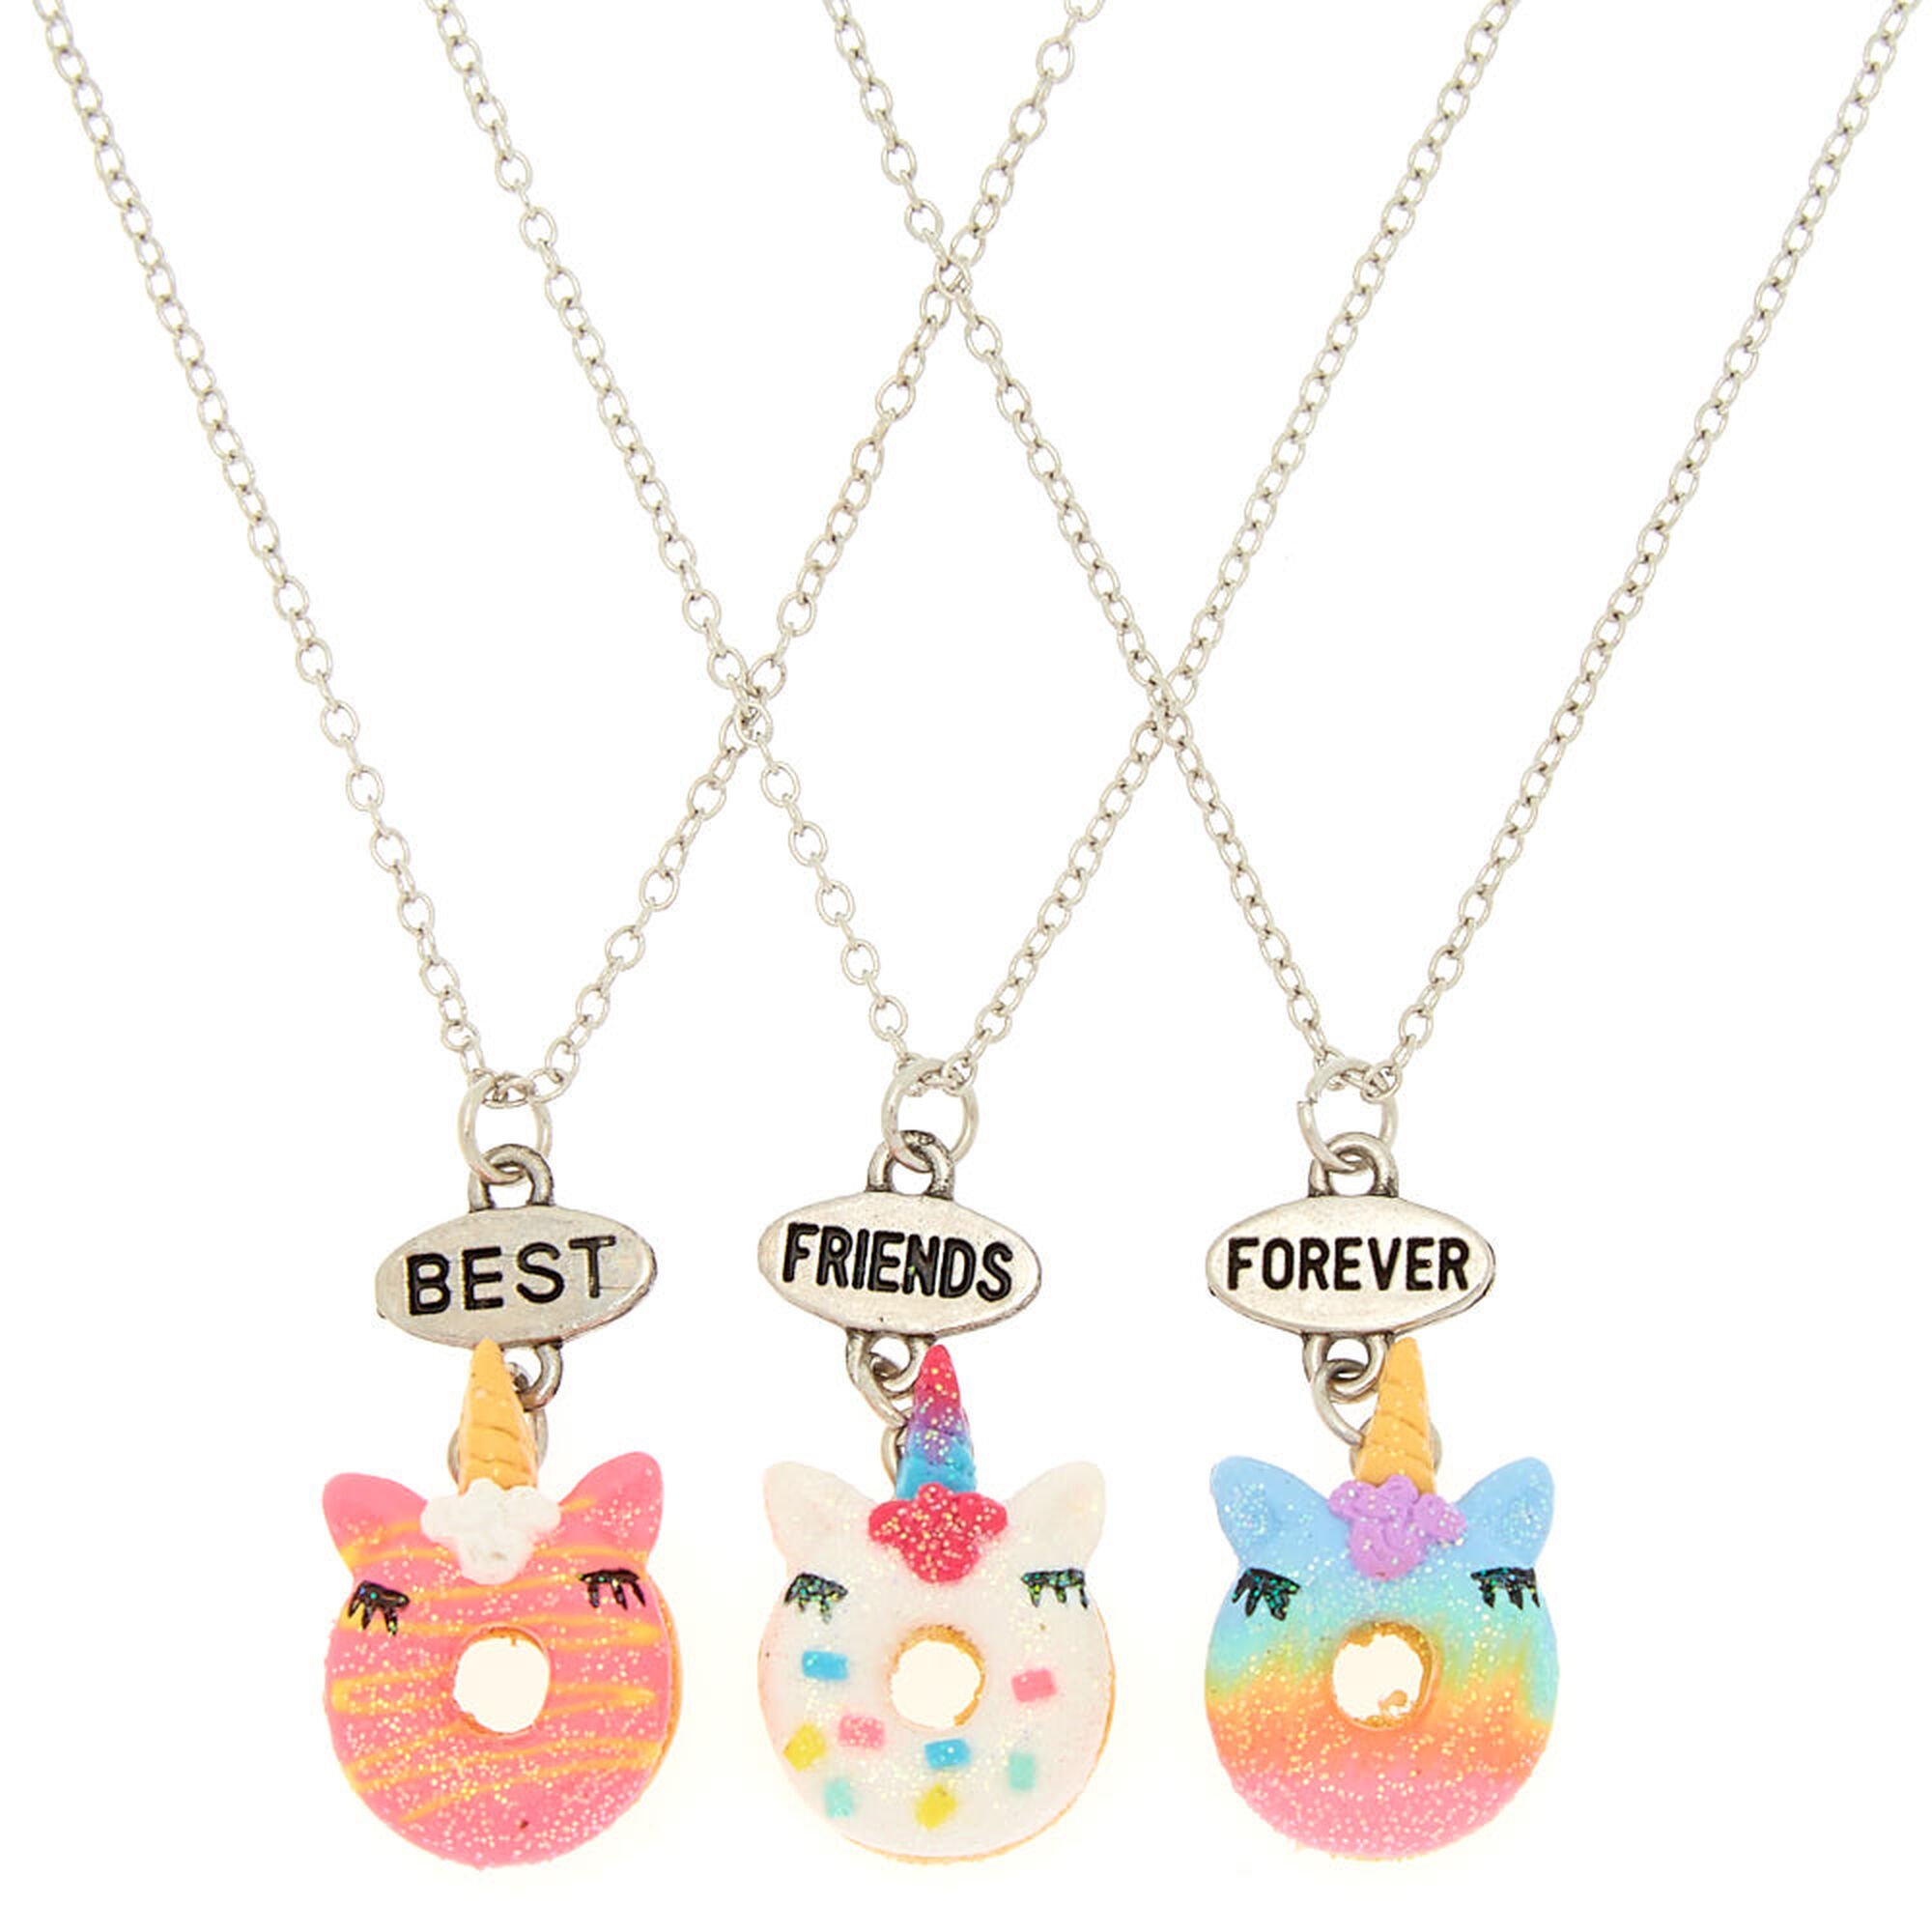 View Claires Best Friends Unicorn Donut Necklaces 3 Pack Silver information